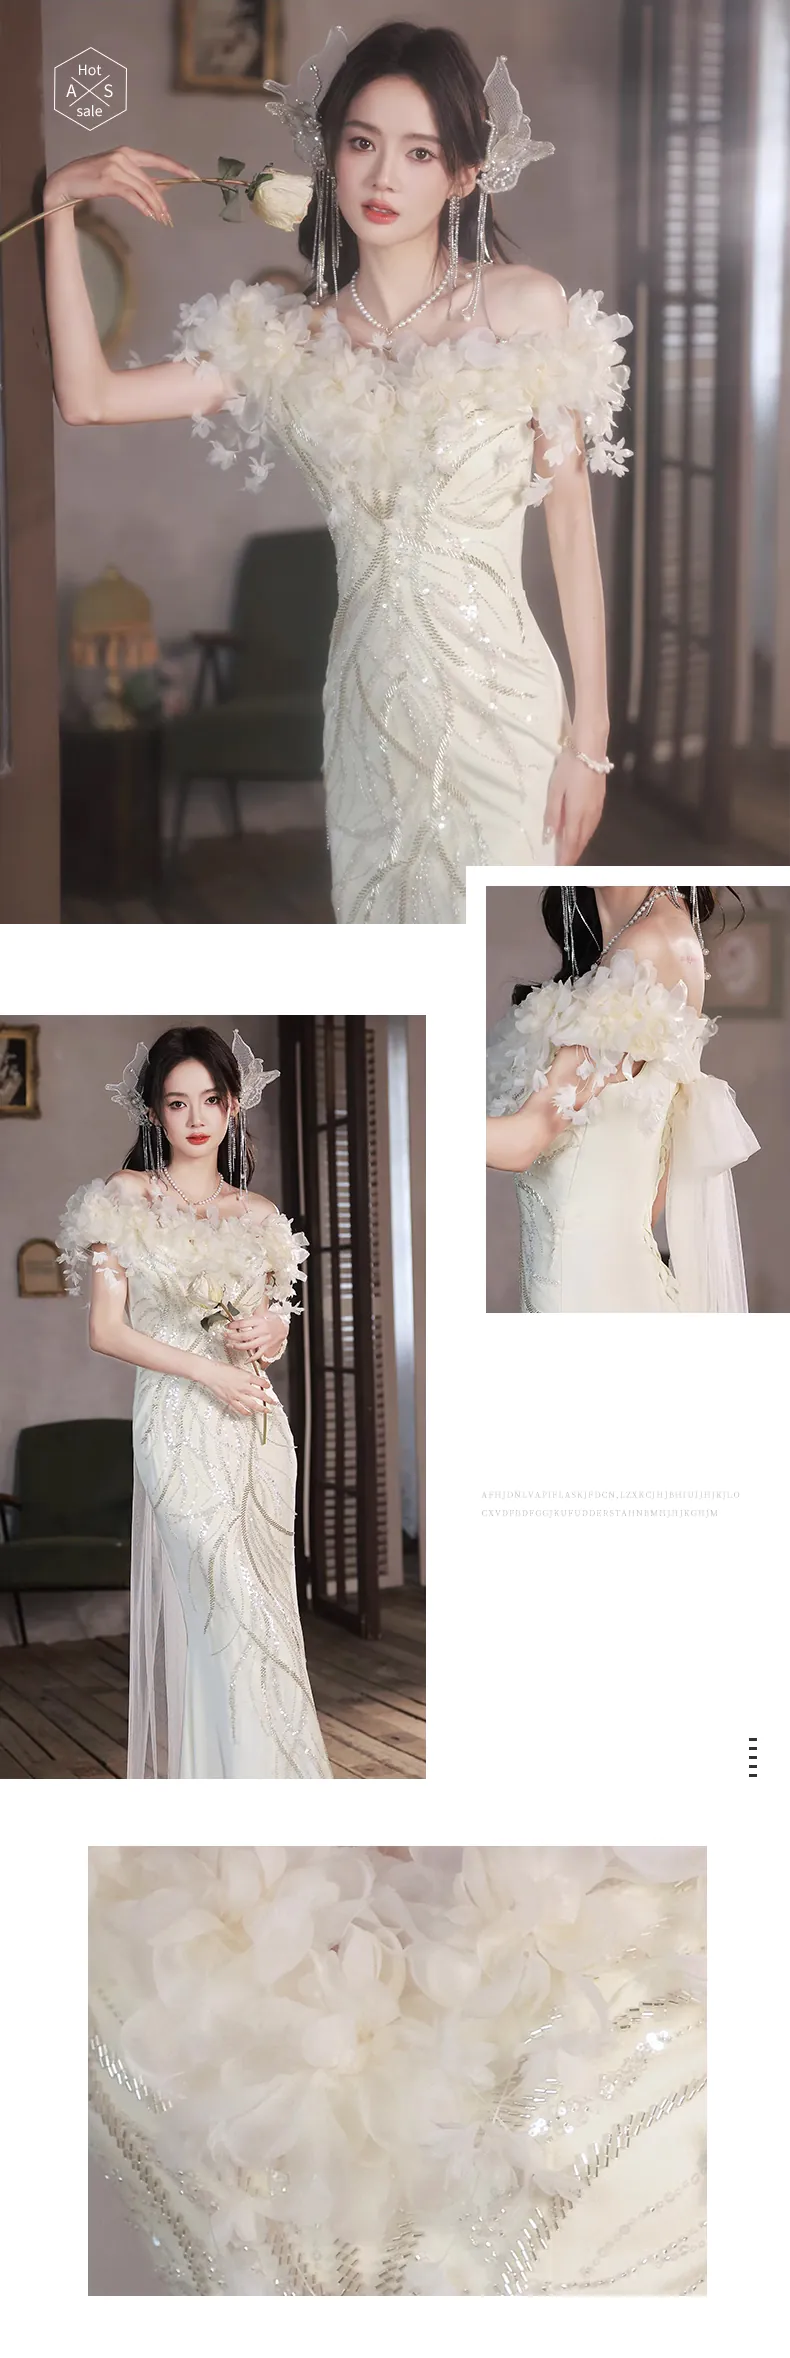 Fairy-Creamy-White-Off-the-Shoulder-Fishtail-Banquet-Prom-Party-Dress08